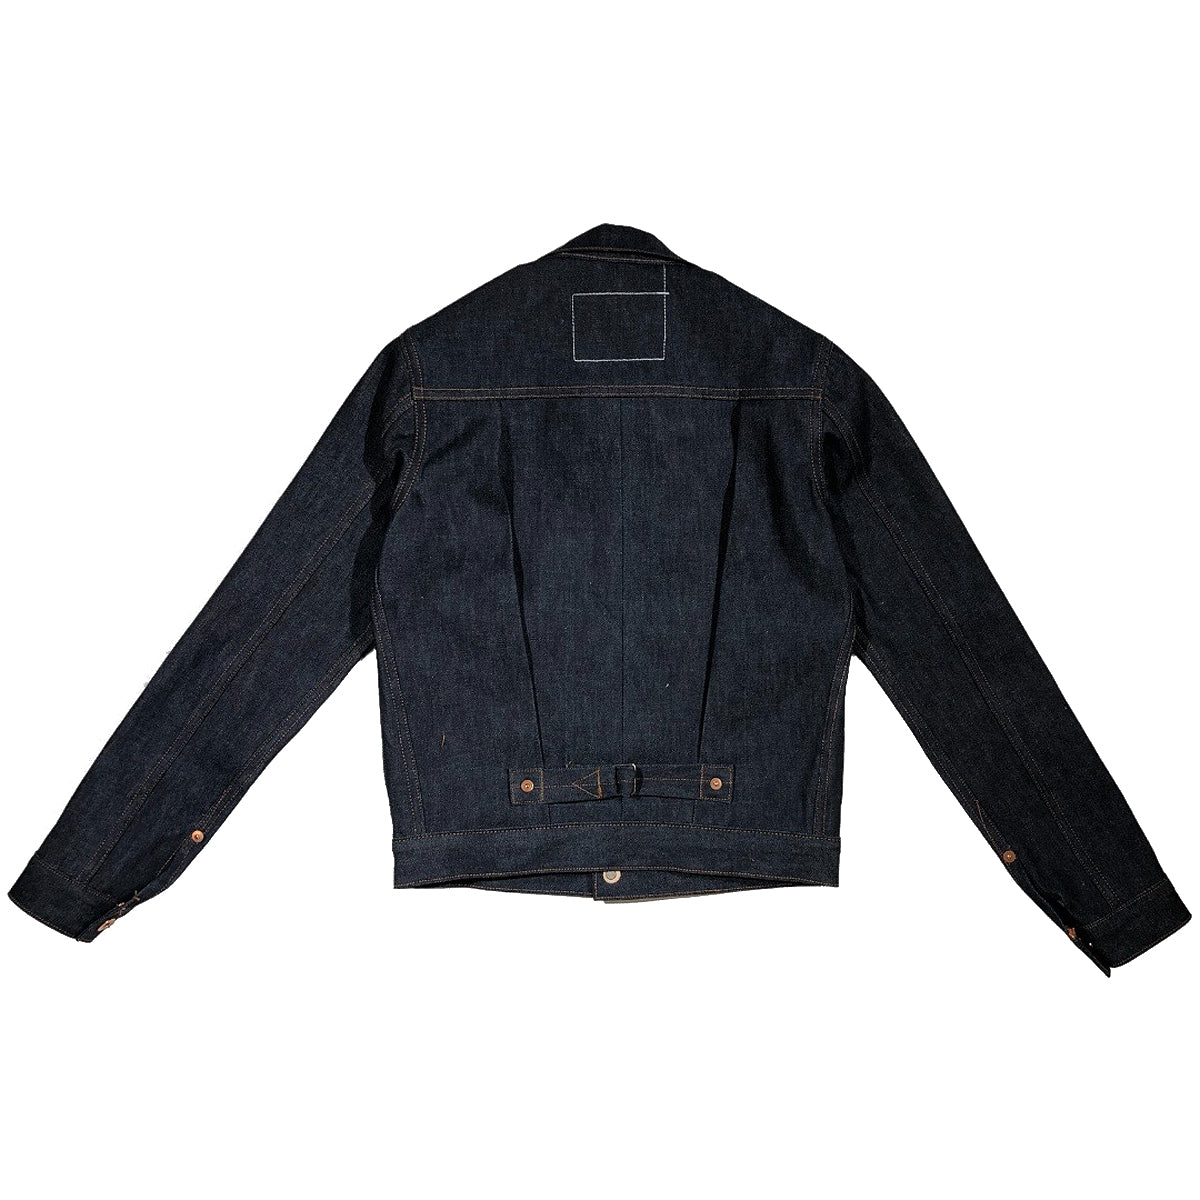 #N43Z3 13oz Japanese Selvage 1936 Type I Jacket  {Limited Quantities}